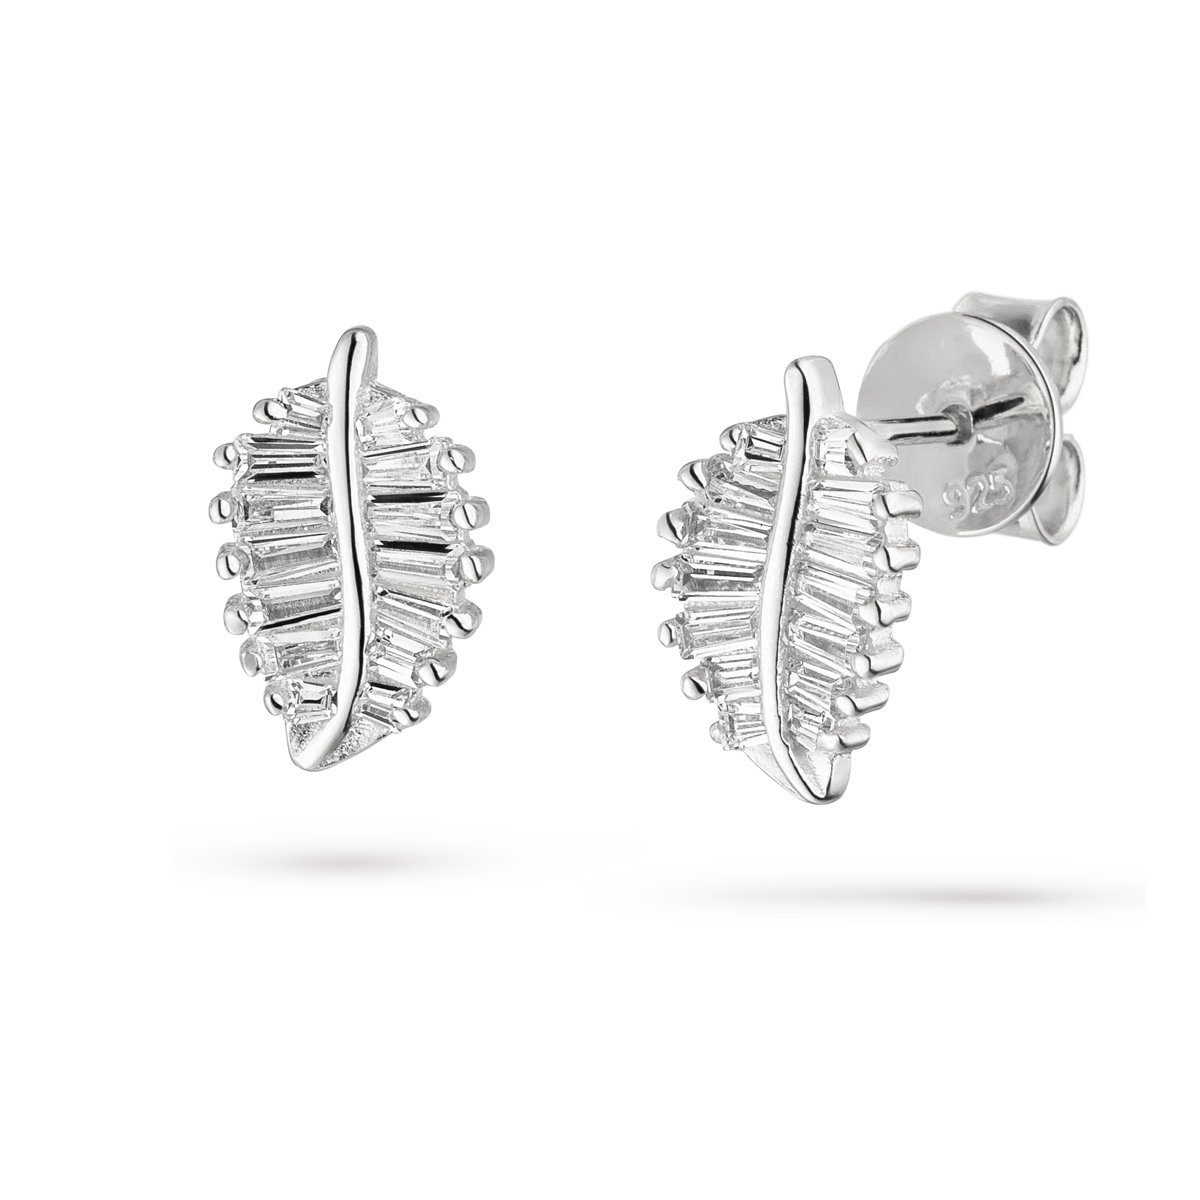 Fiocco Ohrstecker Ohrringe, 925 Silber Bella Sterling Jewelry Paar